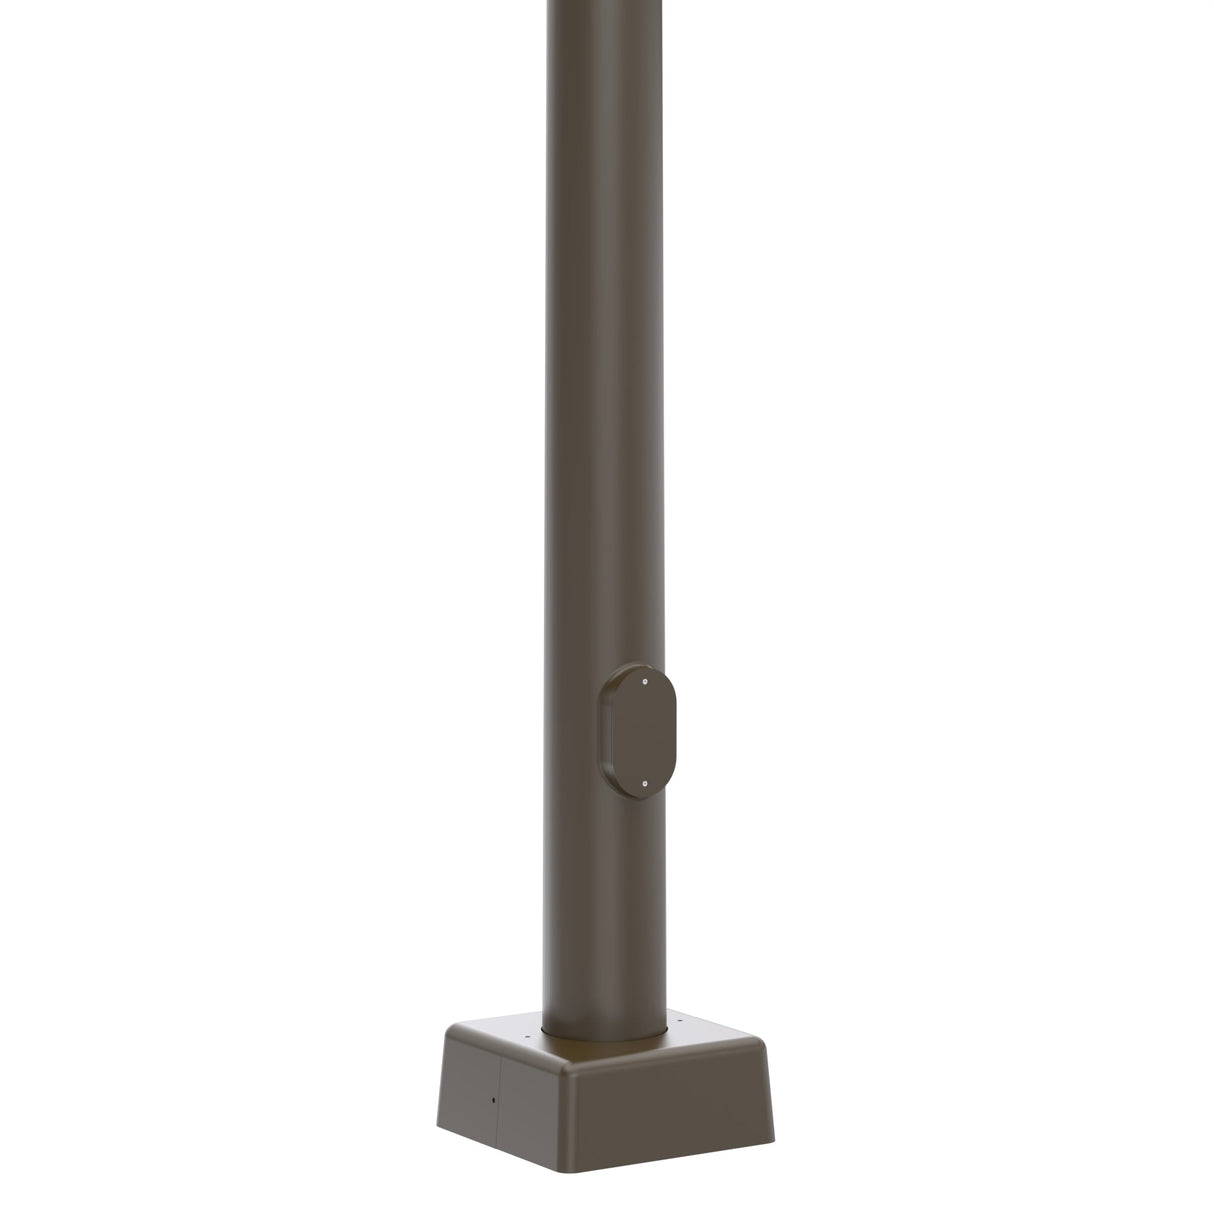 60' Tall x 12.5" Base OD x 4.5" Top OD x 5 & 7ga Thick, Round Tapered Steel, Anchor Base Light Pole